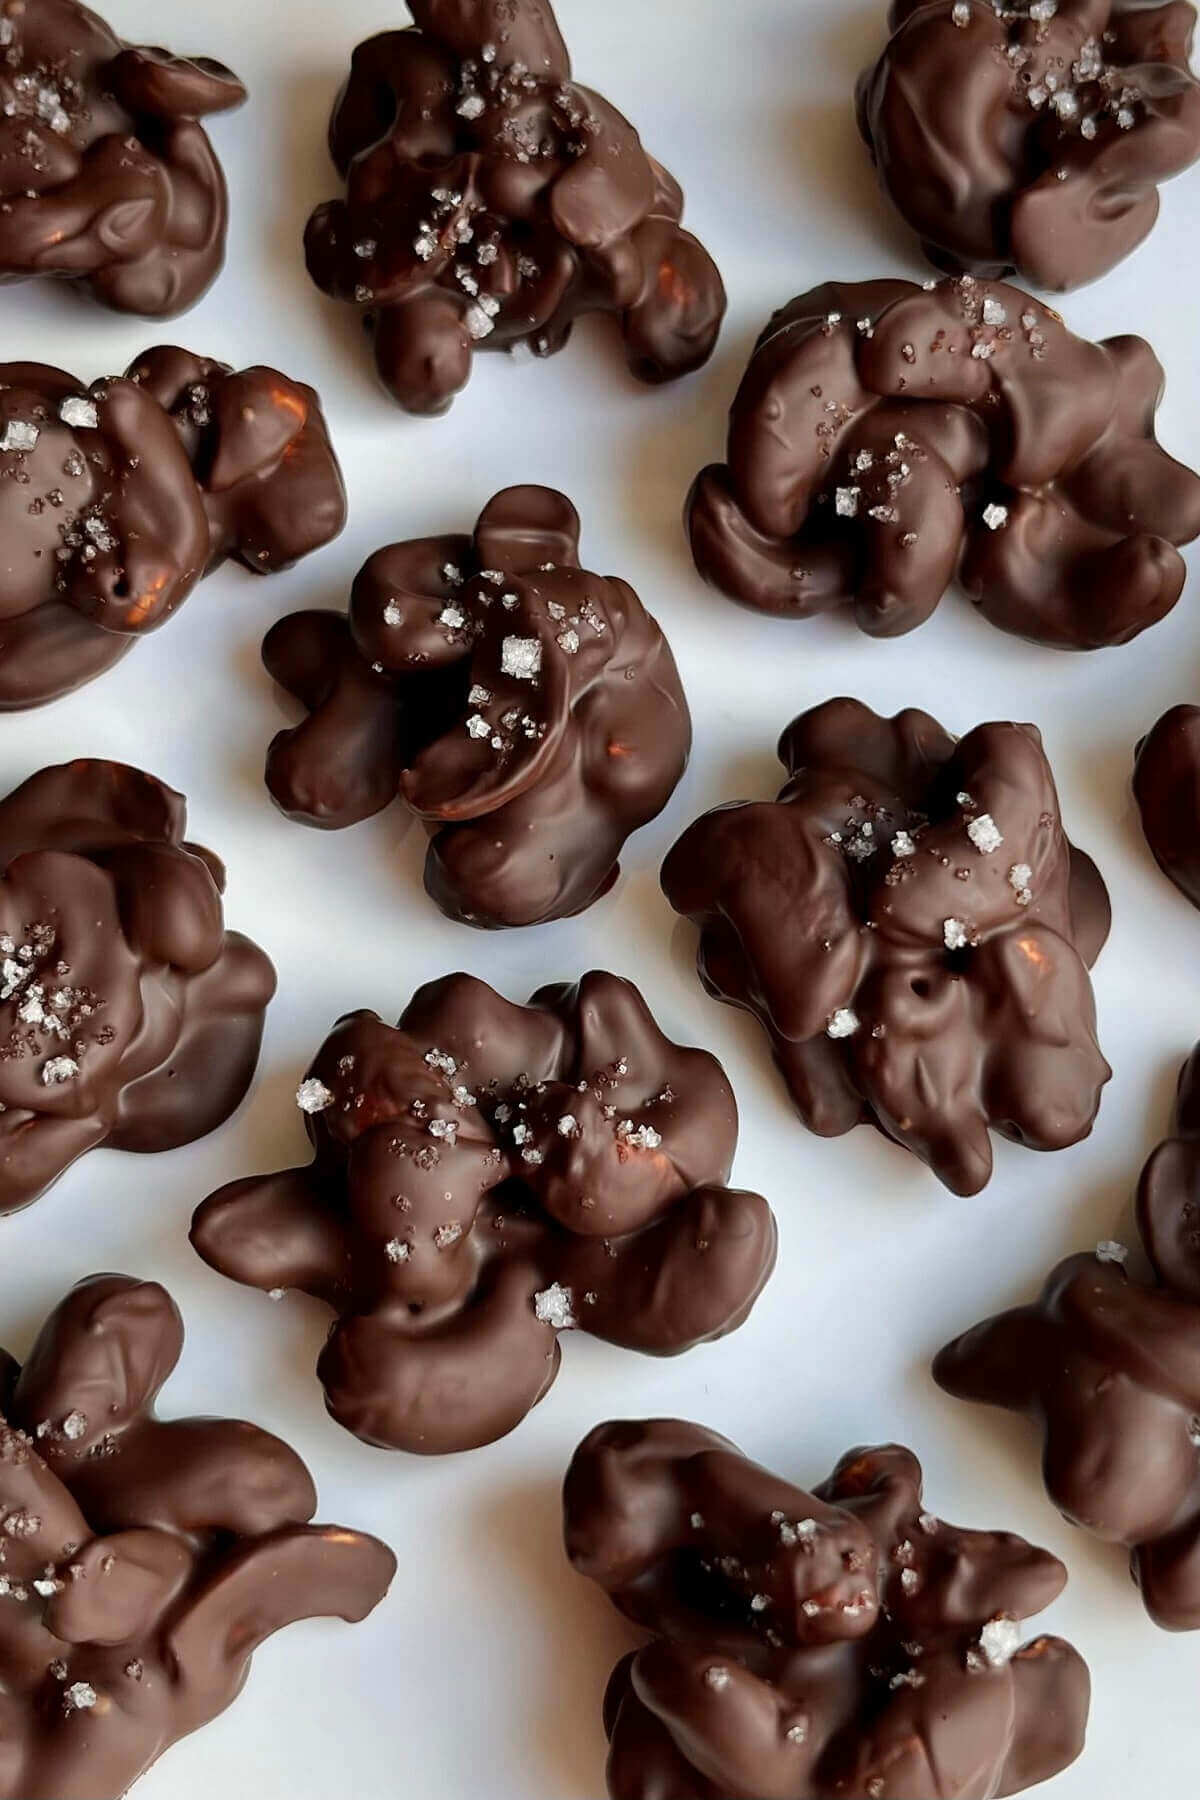 Chocolate dipped cashews on a white plate.